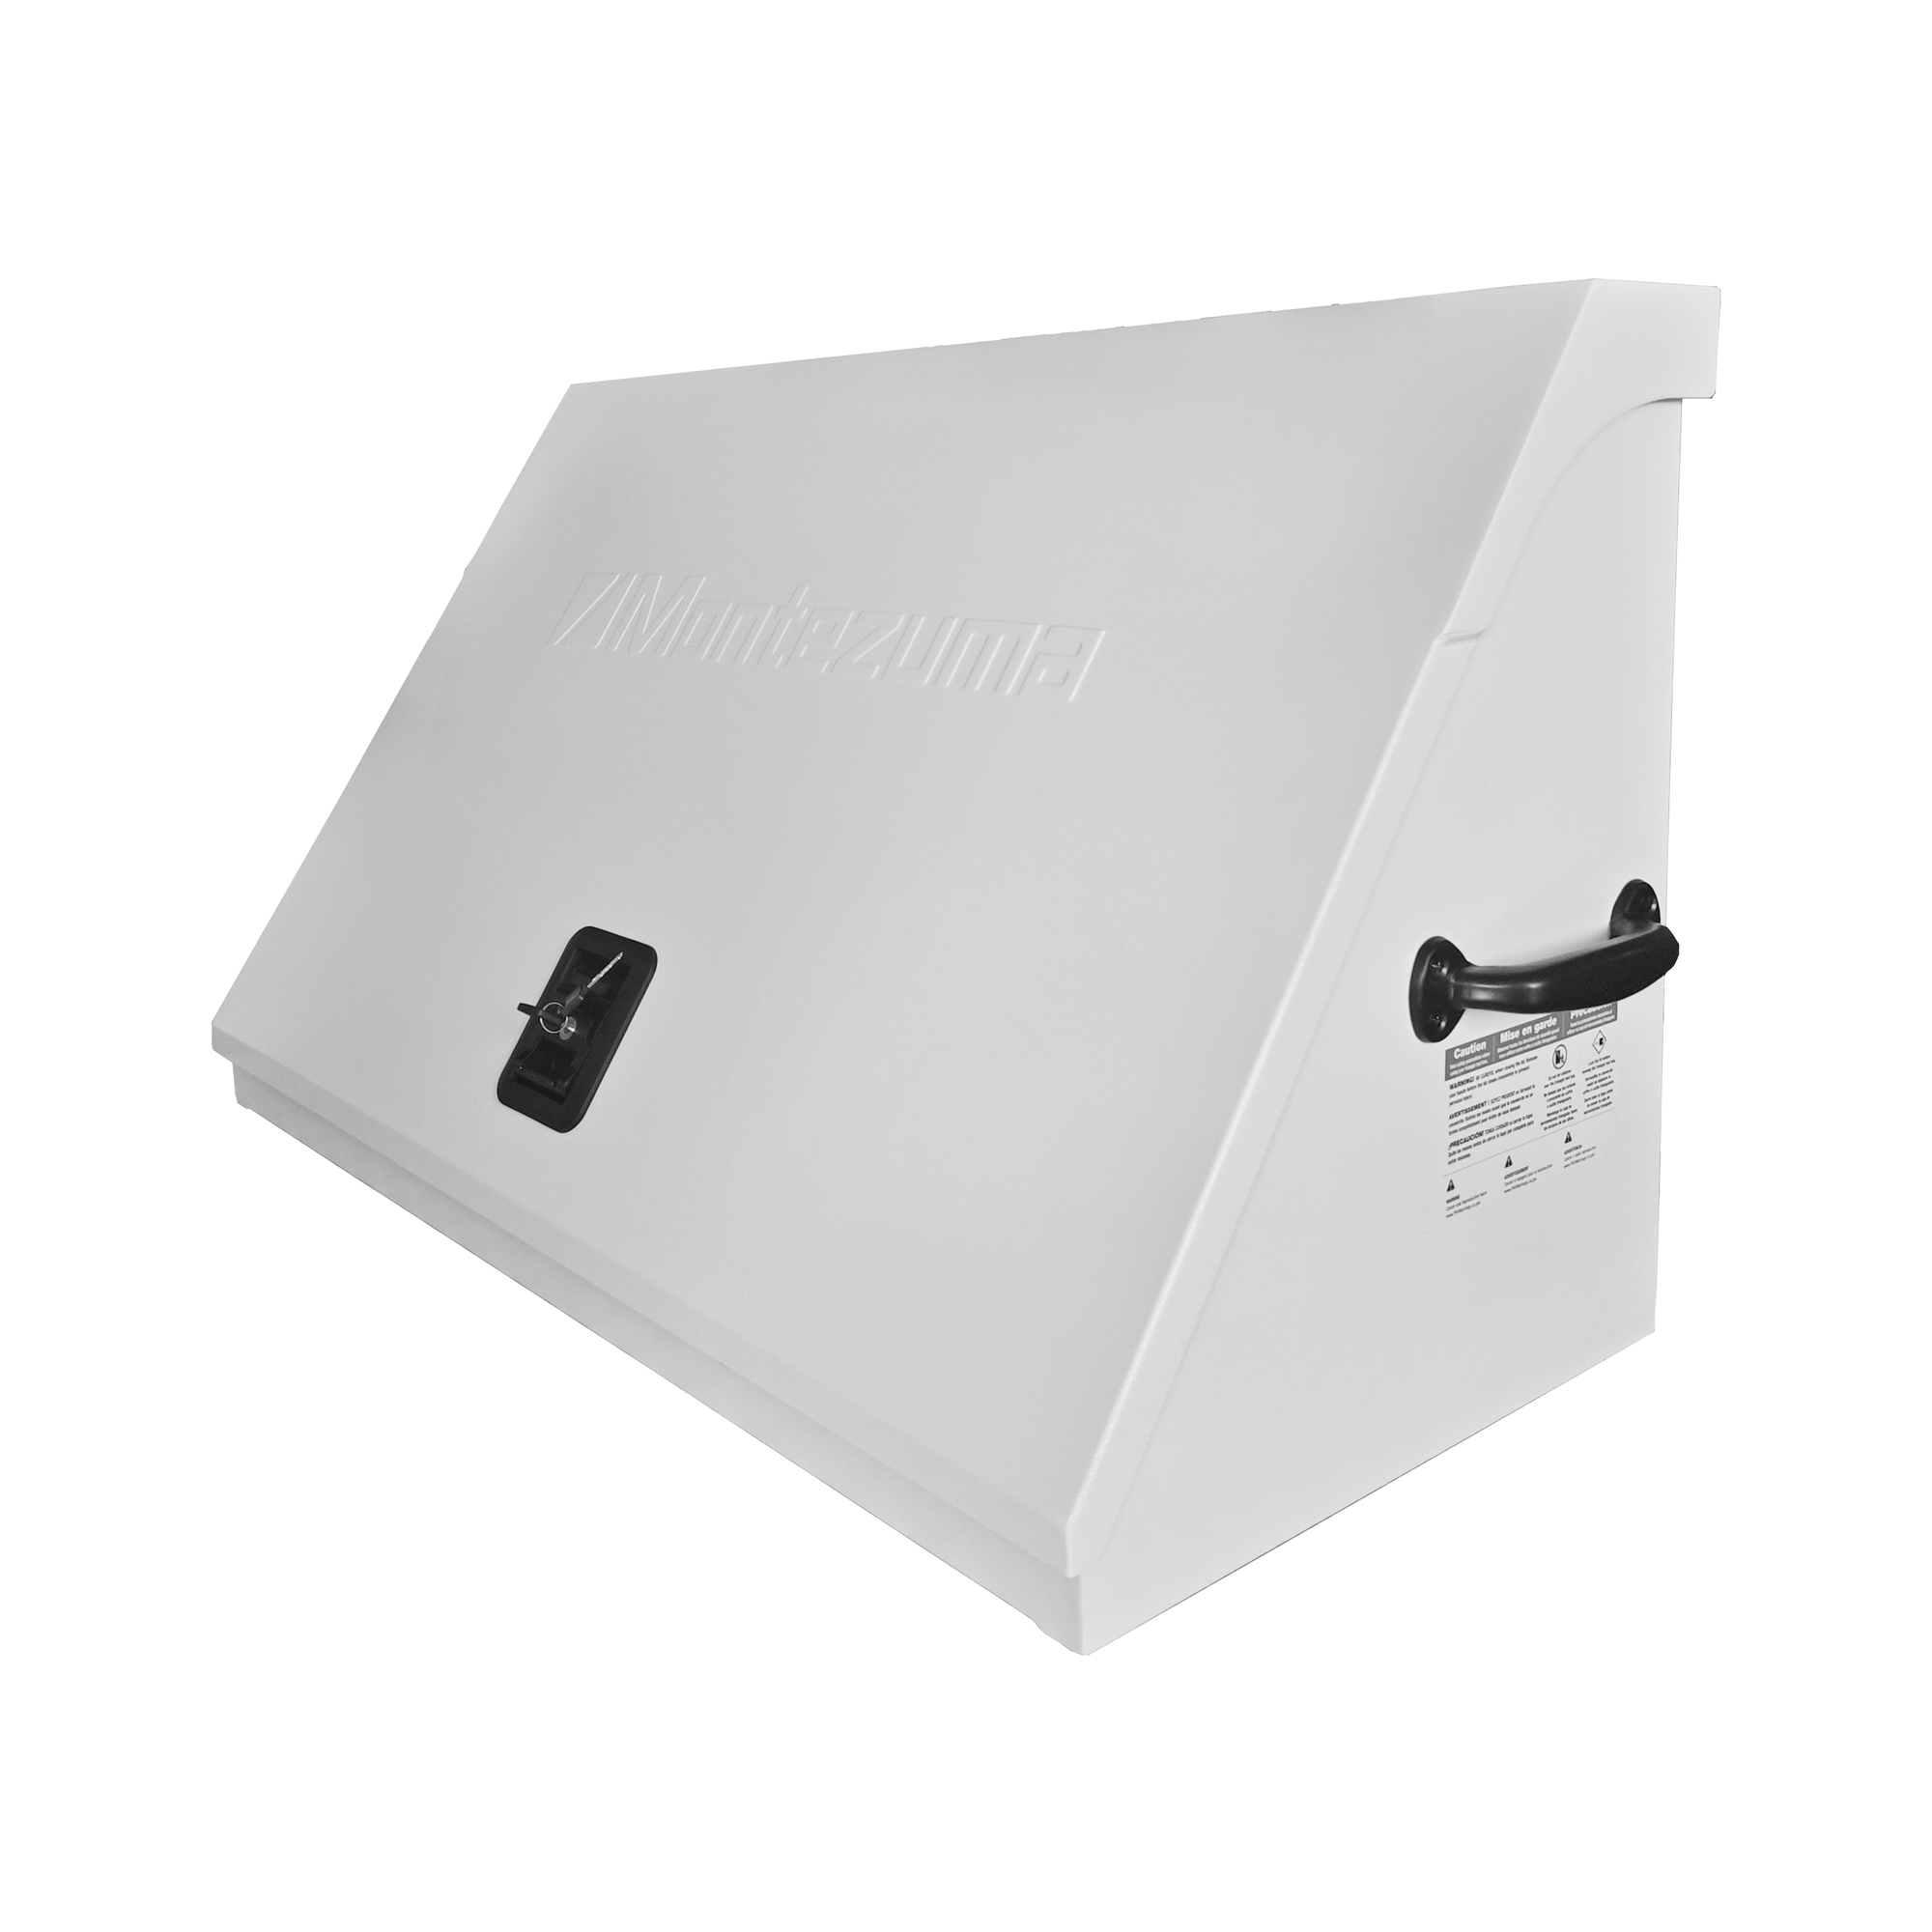 Montezuma, 36Inch x 17Inch Triangle Toolbox (steel, white), Width 36.81 in, Height 21.61 in, Color White, Model XL450-WB